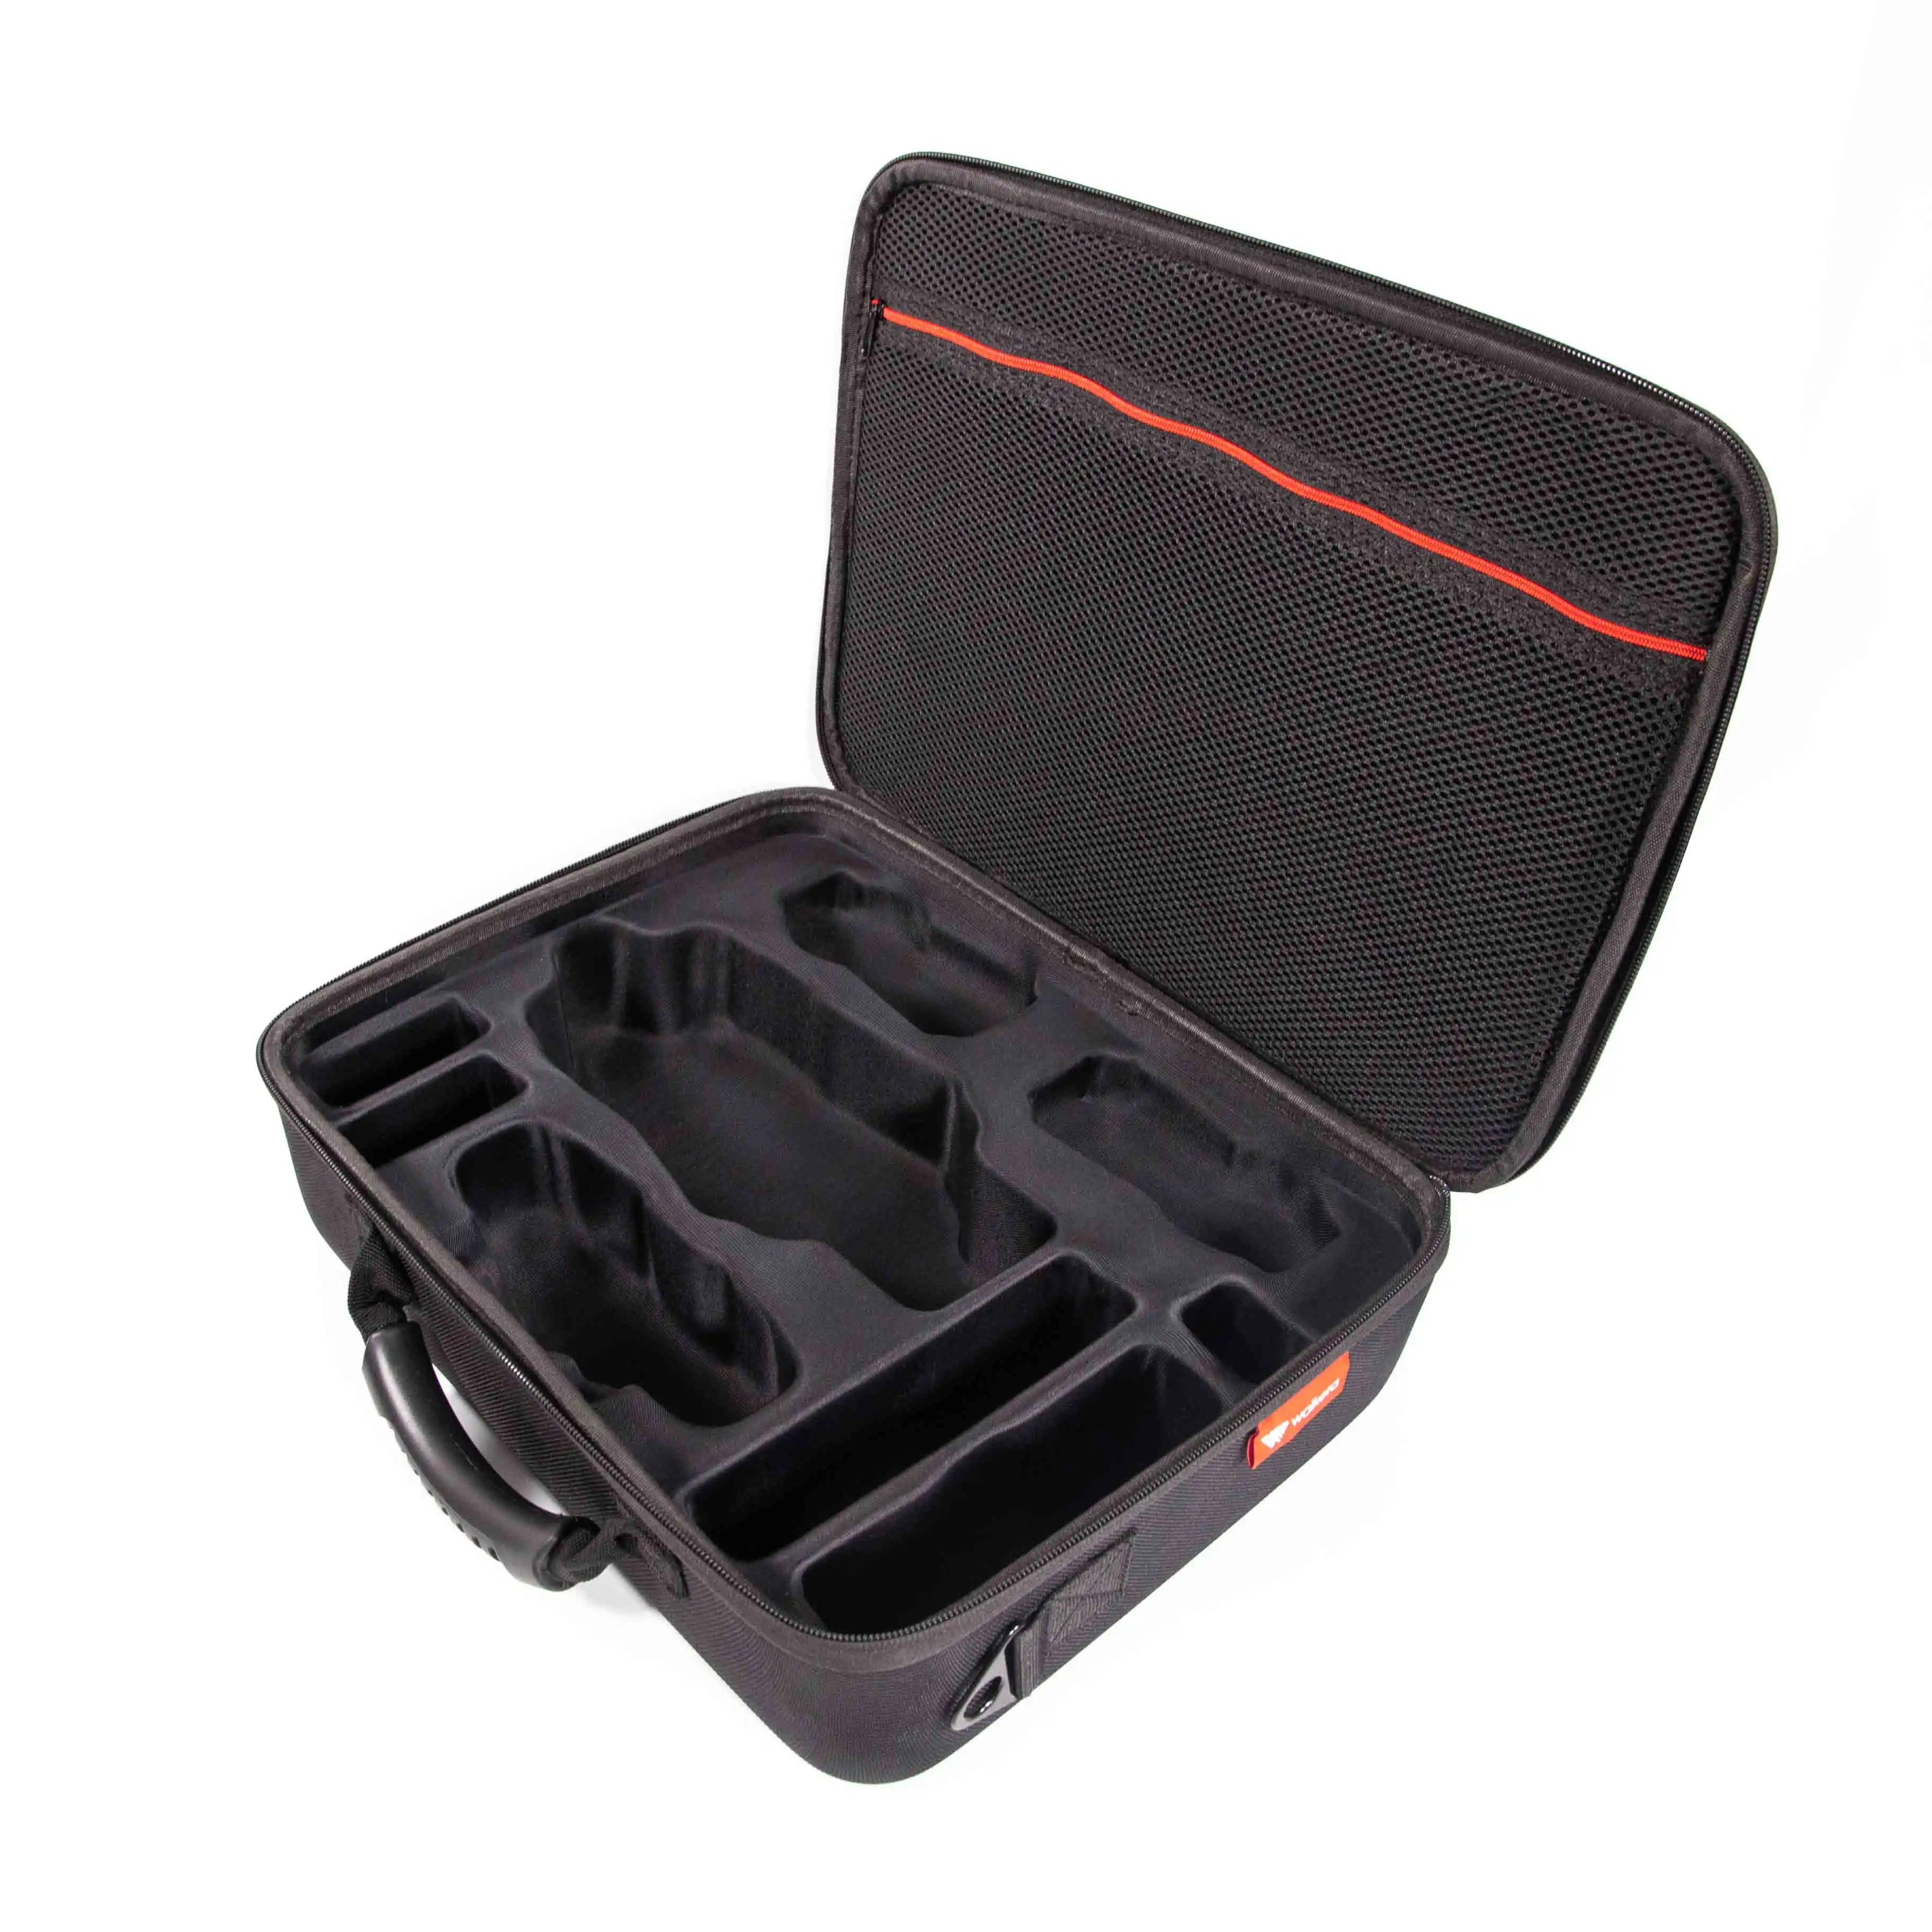 Customized Protective High Quality Hard Shell Storage Shockproof Eva Zipper Drone Case Bag With Foam For Tool